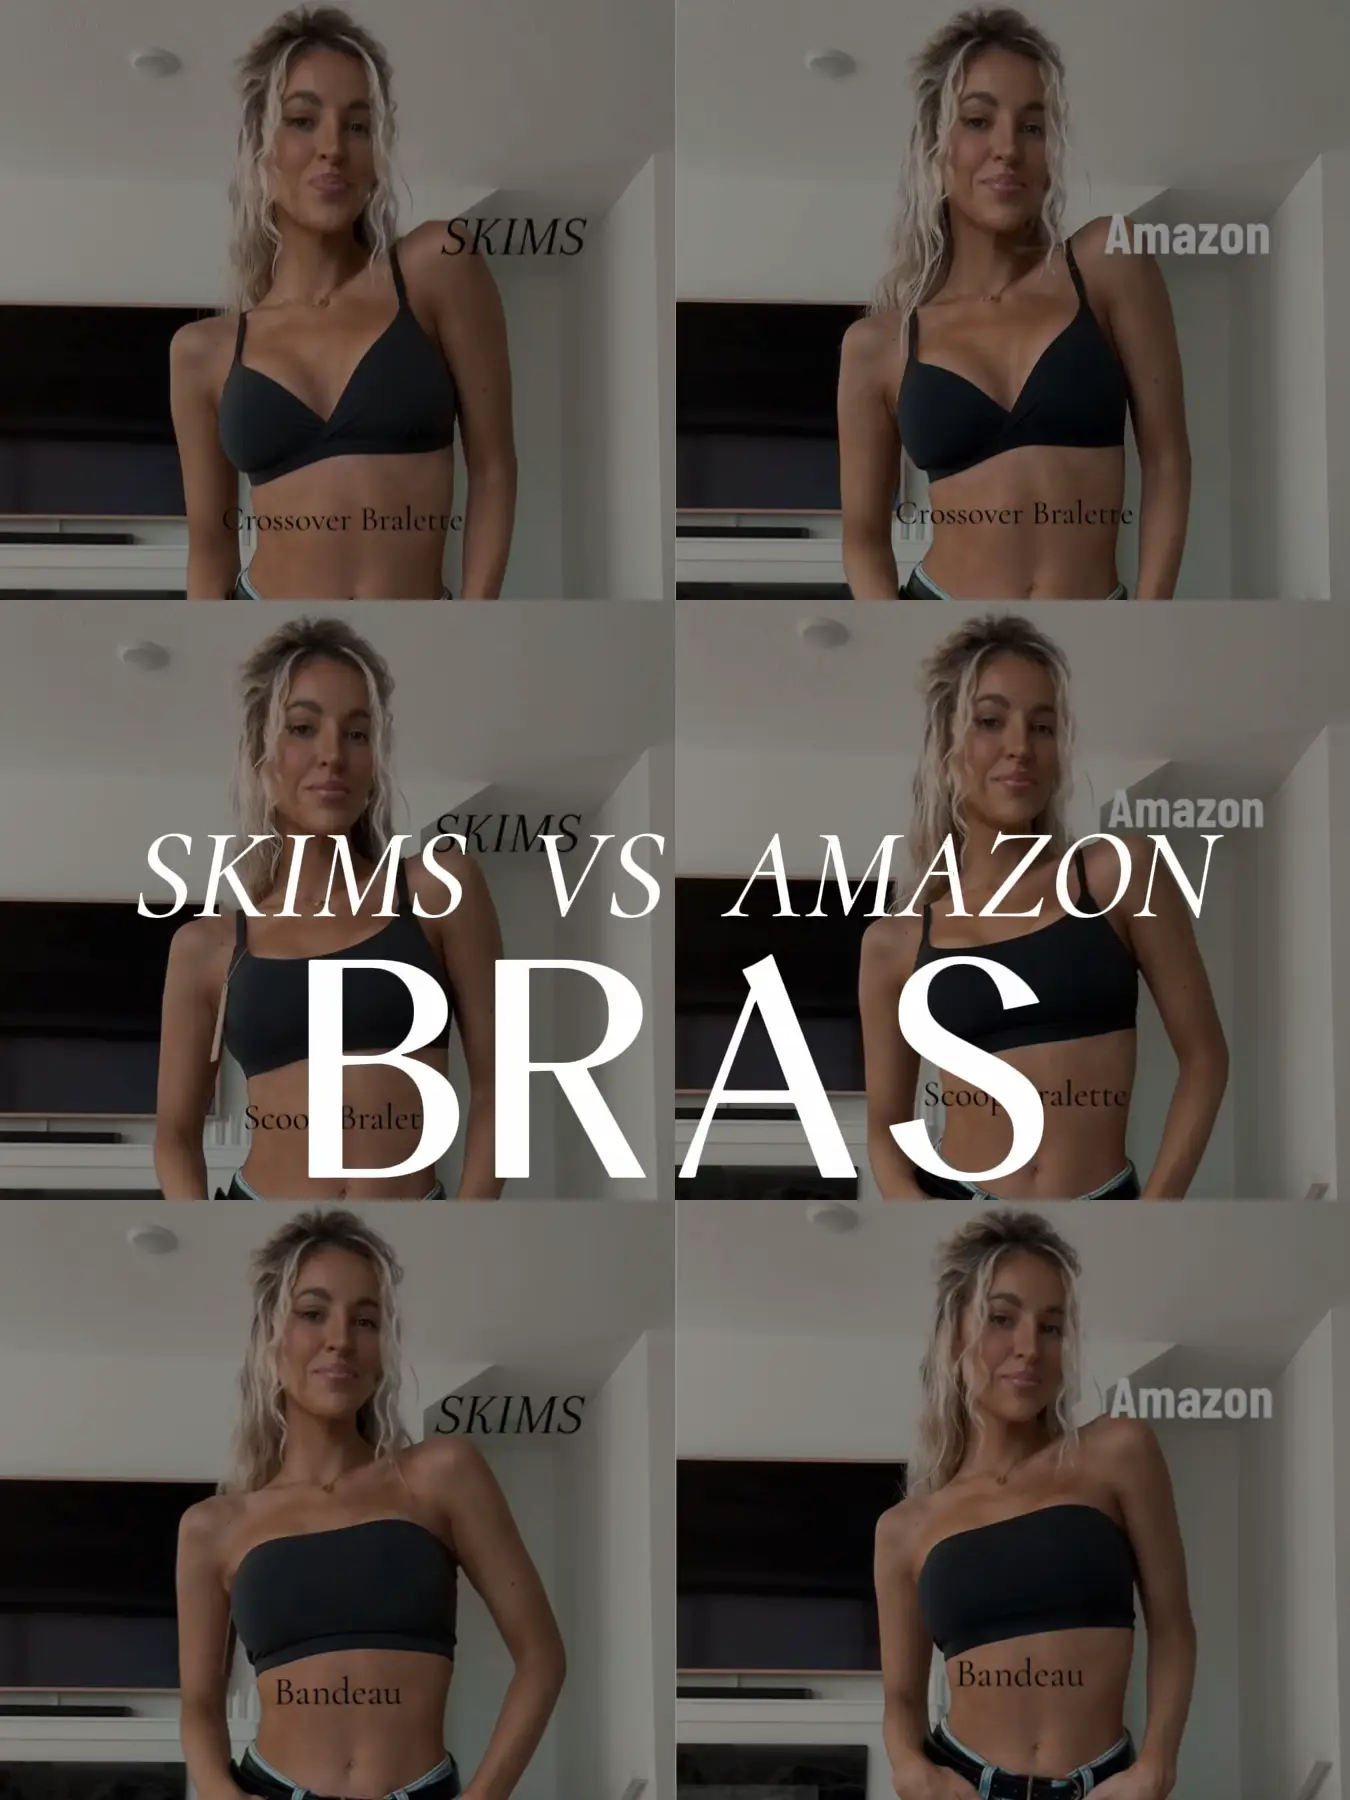 looking for dupes of this skims bra : r/ABraThatFits